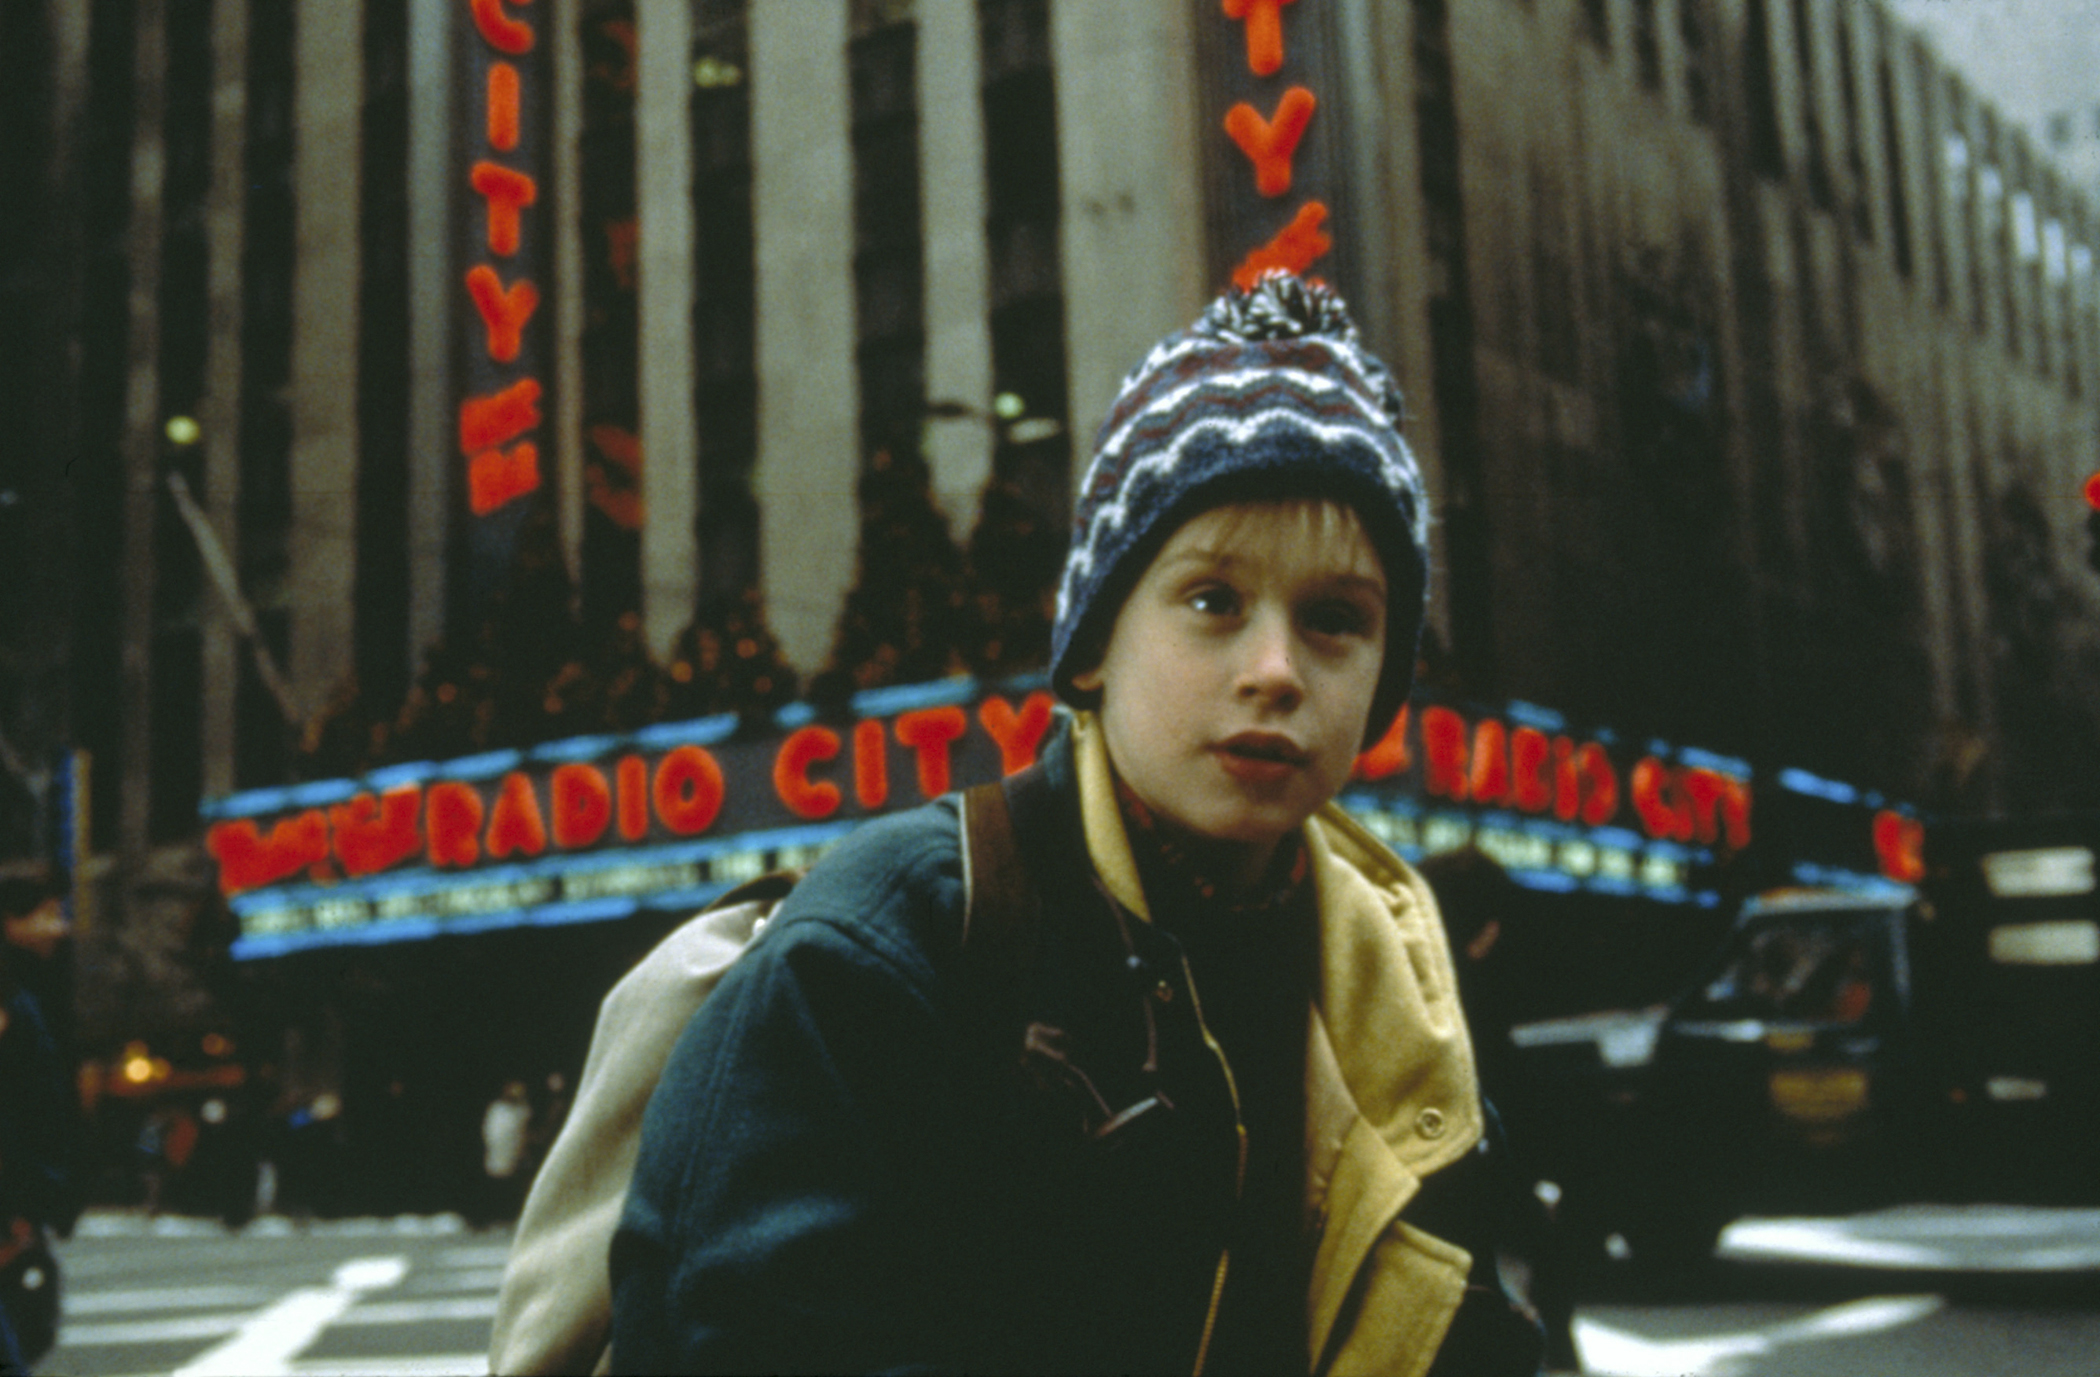 <b>No. 4:</b> <i>Home Alone 2: Lost in New York</i>, the sequel to the classic Christmas movie, follows a young boy who is separated from his family at the holidays after boarding the wrong flight. The 1992 flick collected $173.6 million at the box office. (MovieStillsDB)